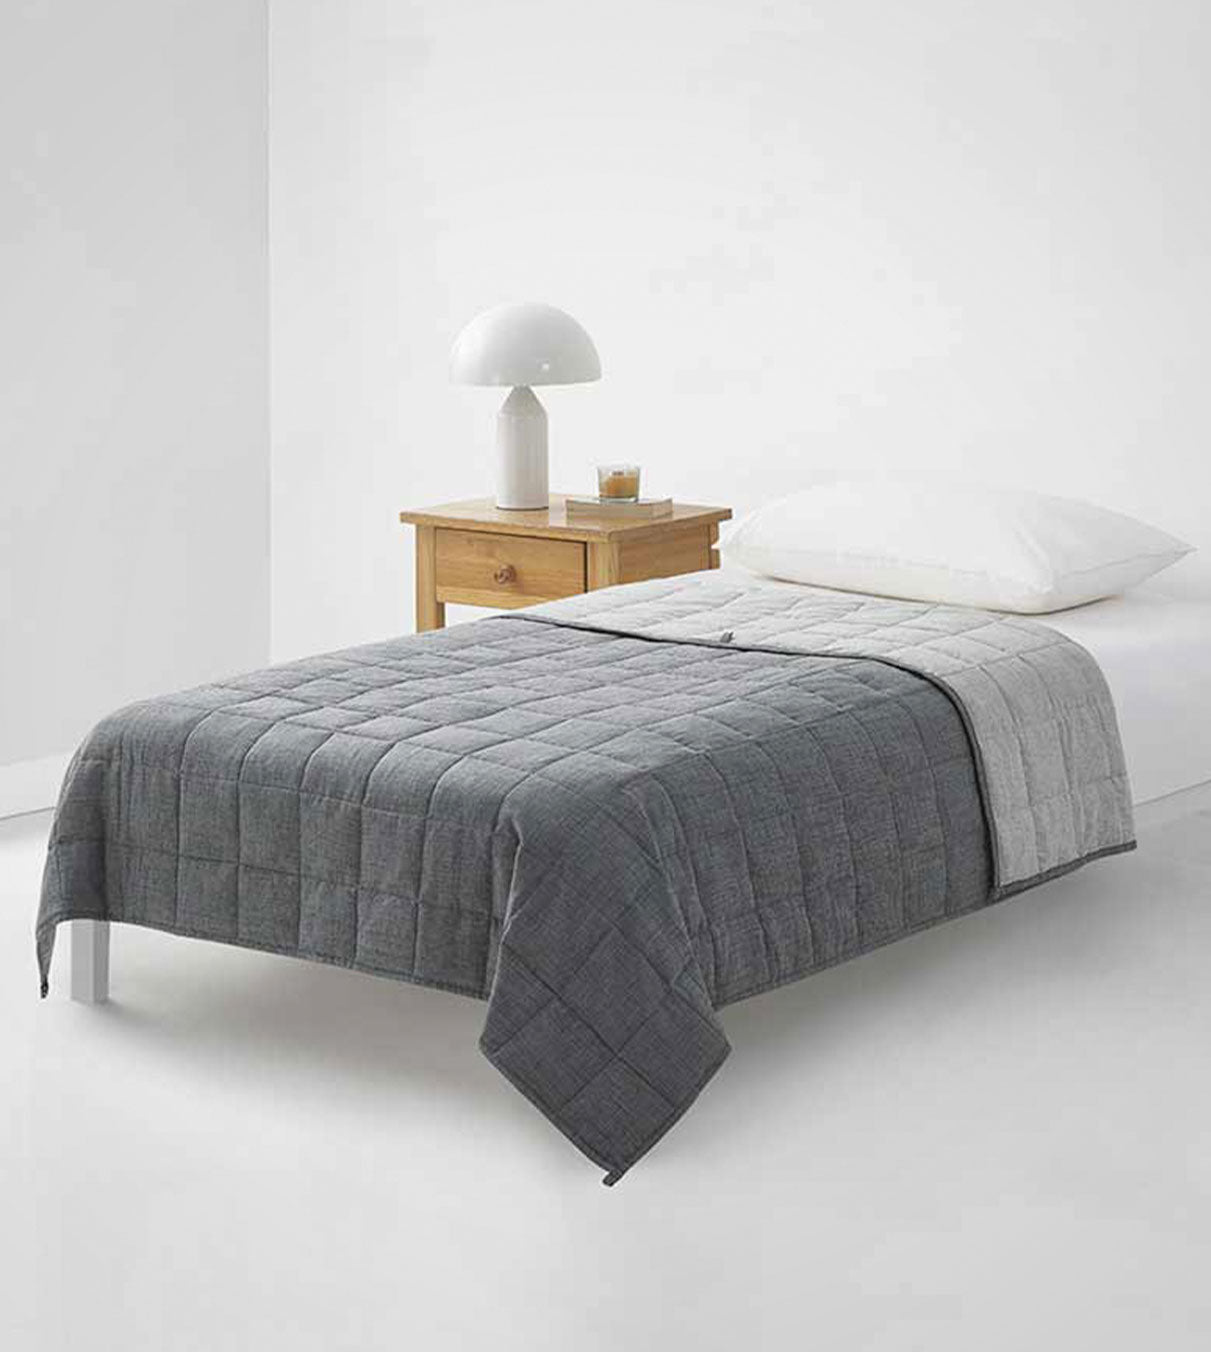 Product: Original Cotton-Linen Weighted Blanket | Color: Cotton-Linen Reversible Grey